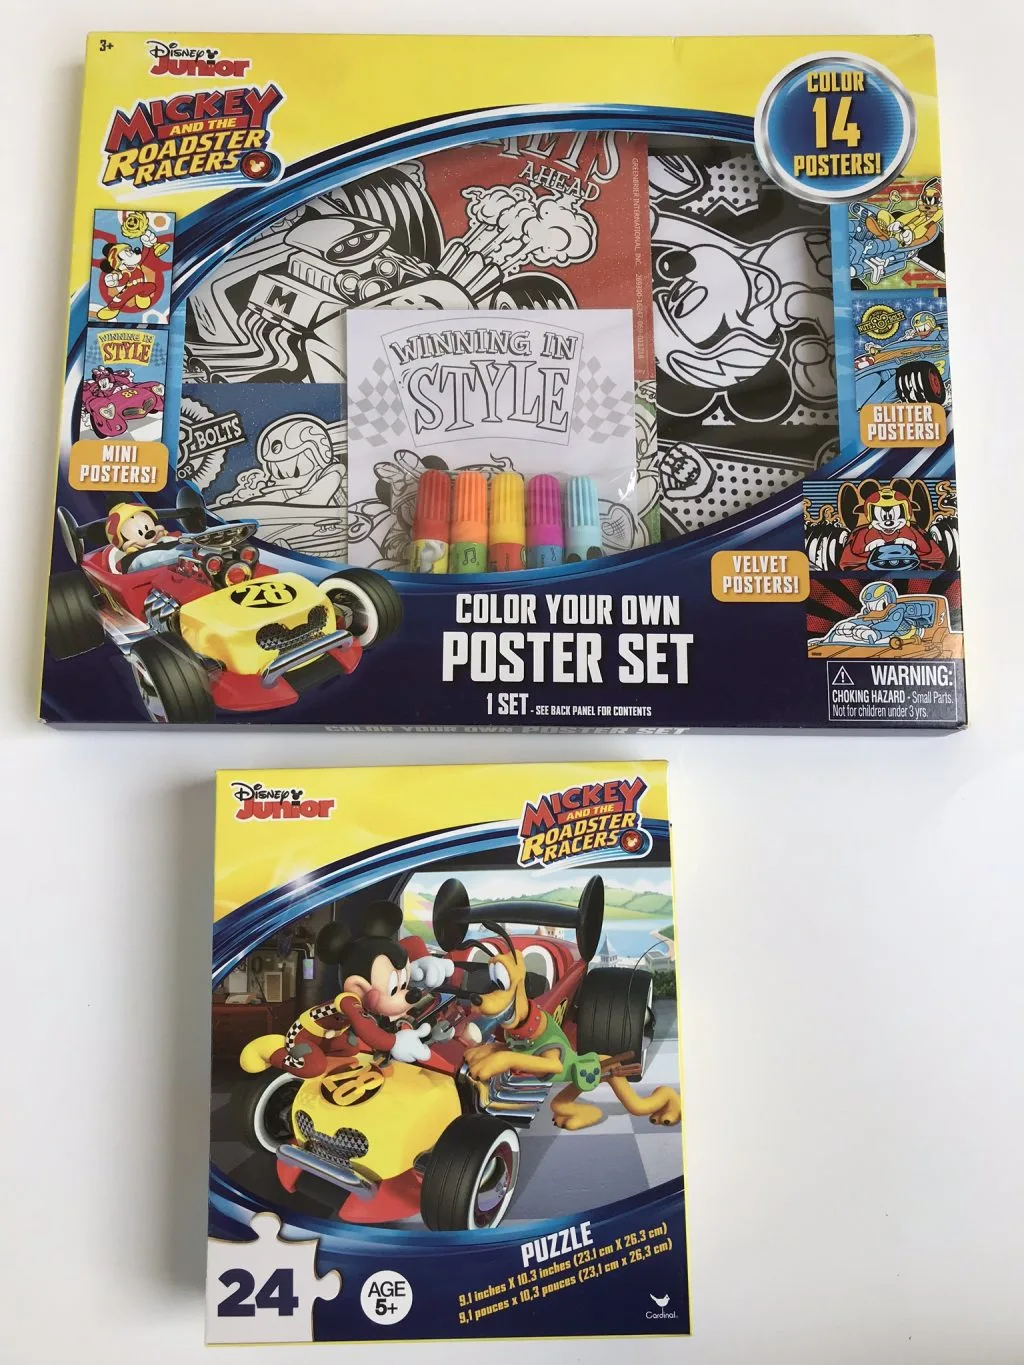 mickey roadster racers colorin set and puzzle